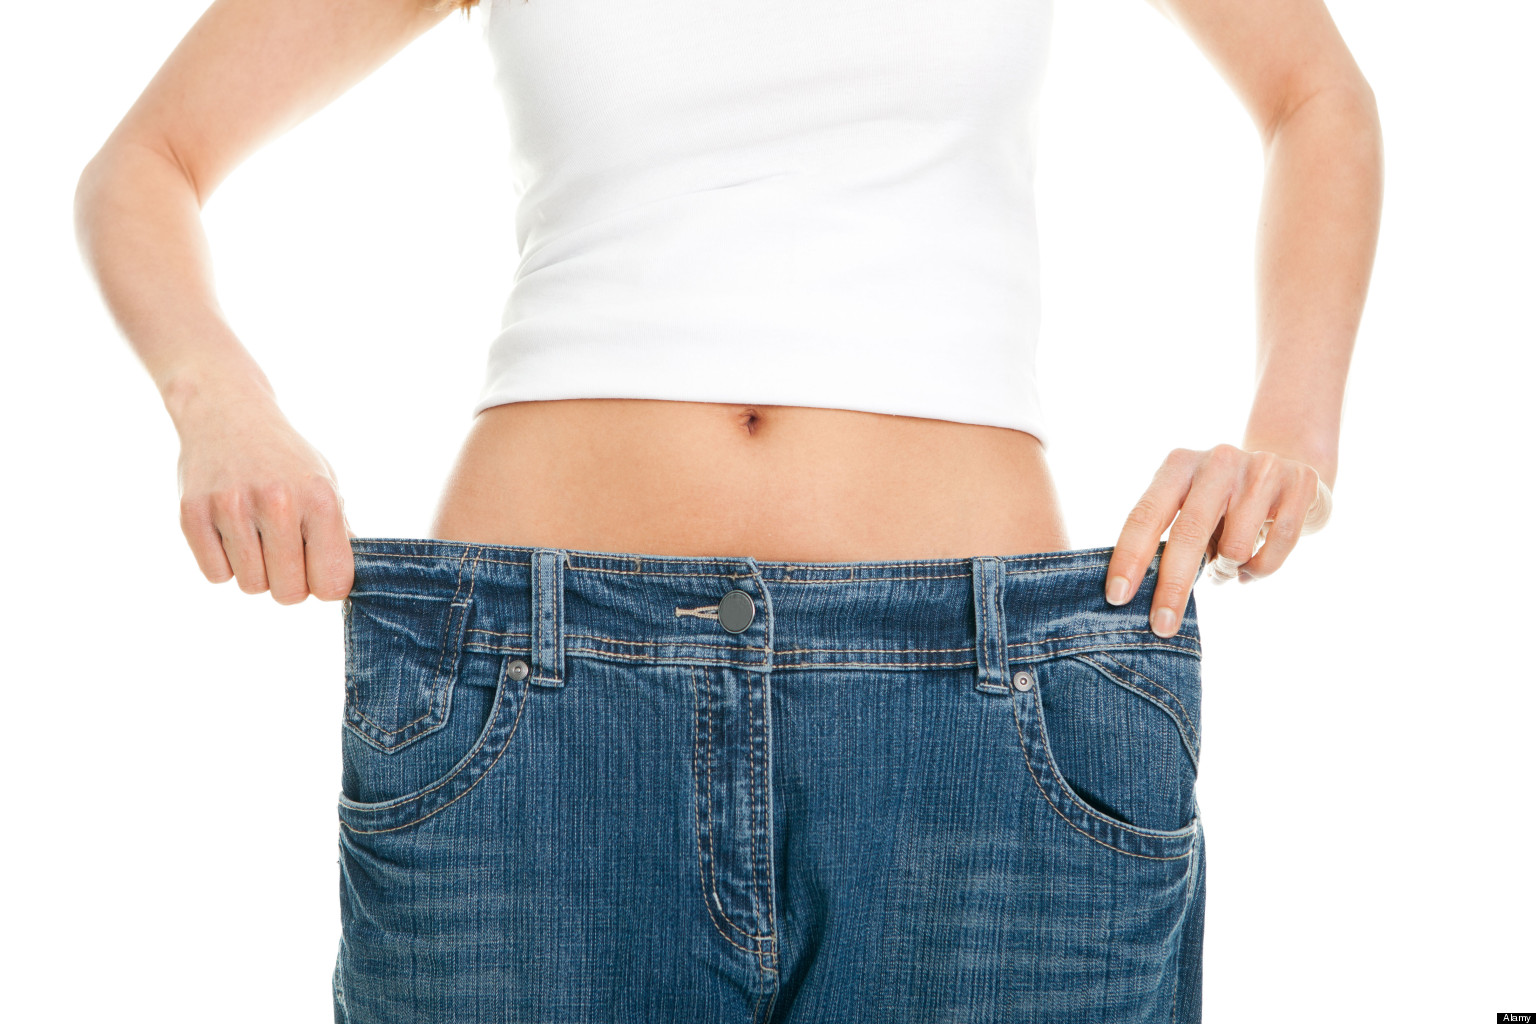 Achieving Weight Loss through Body Piercing